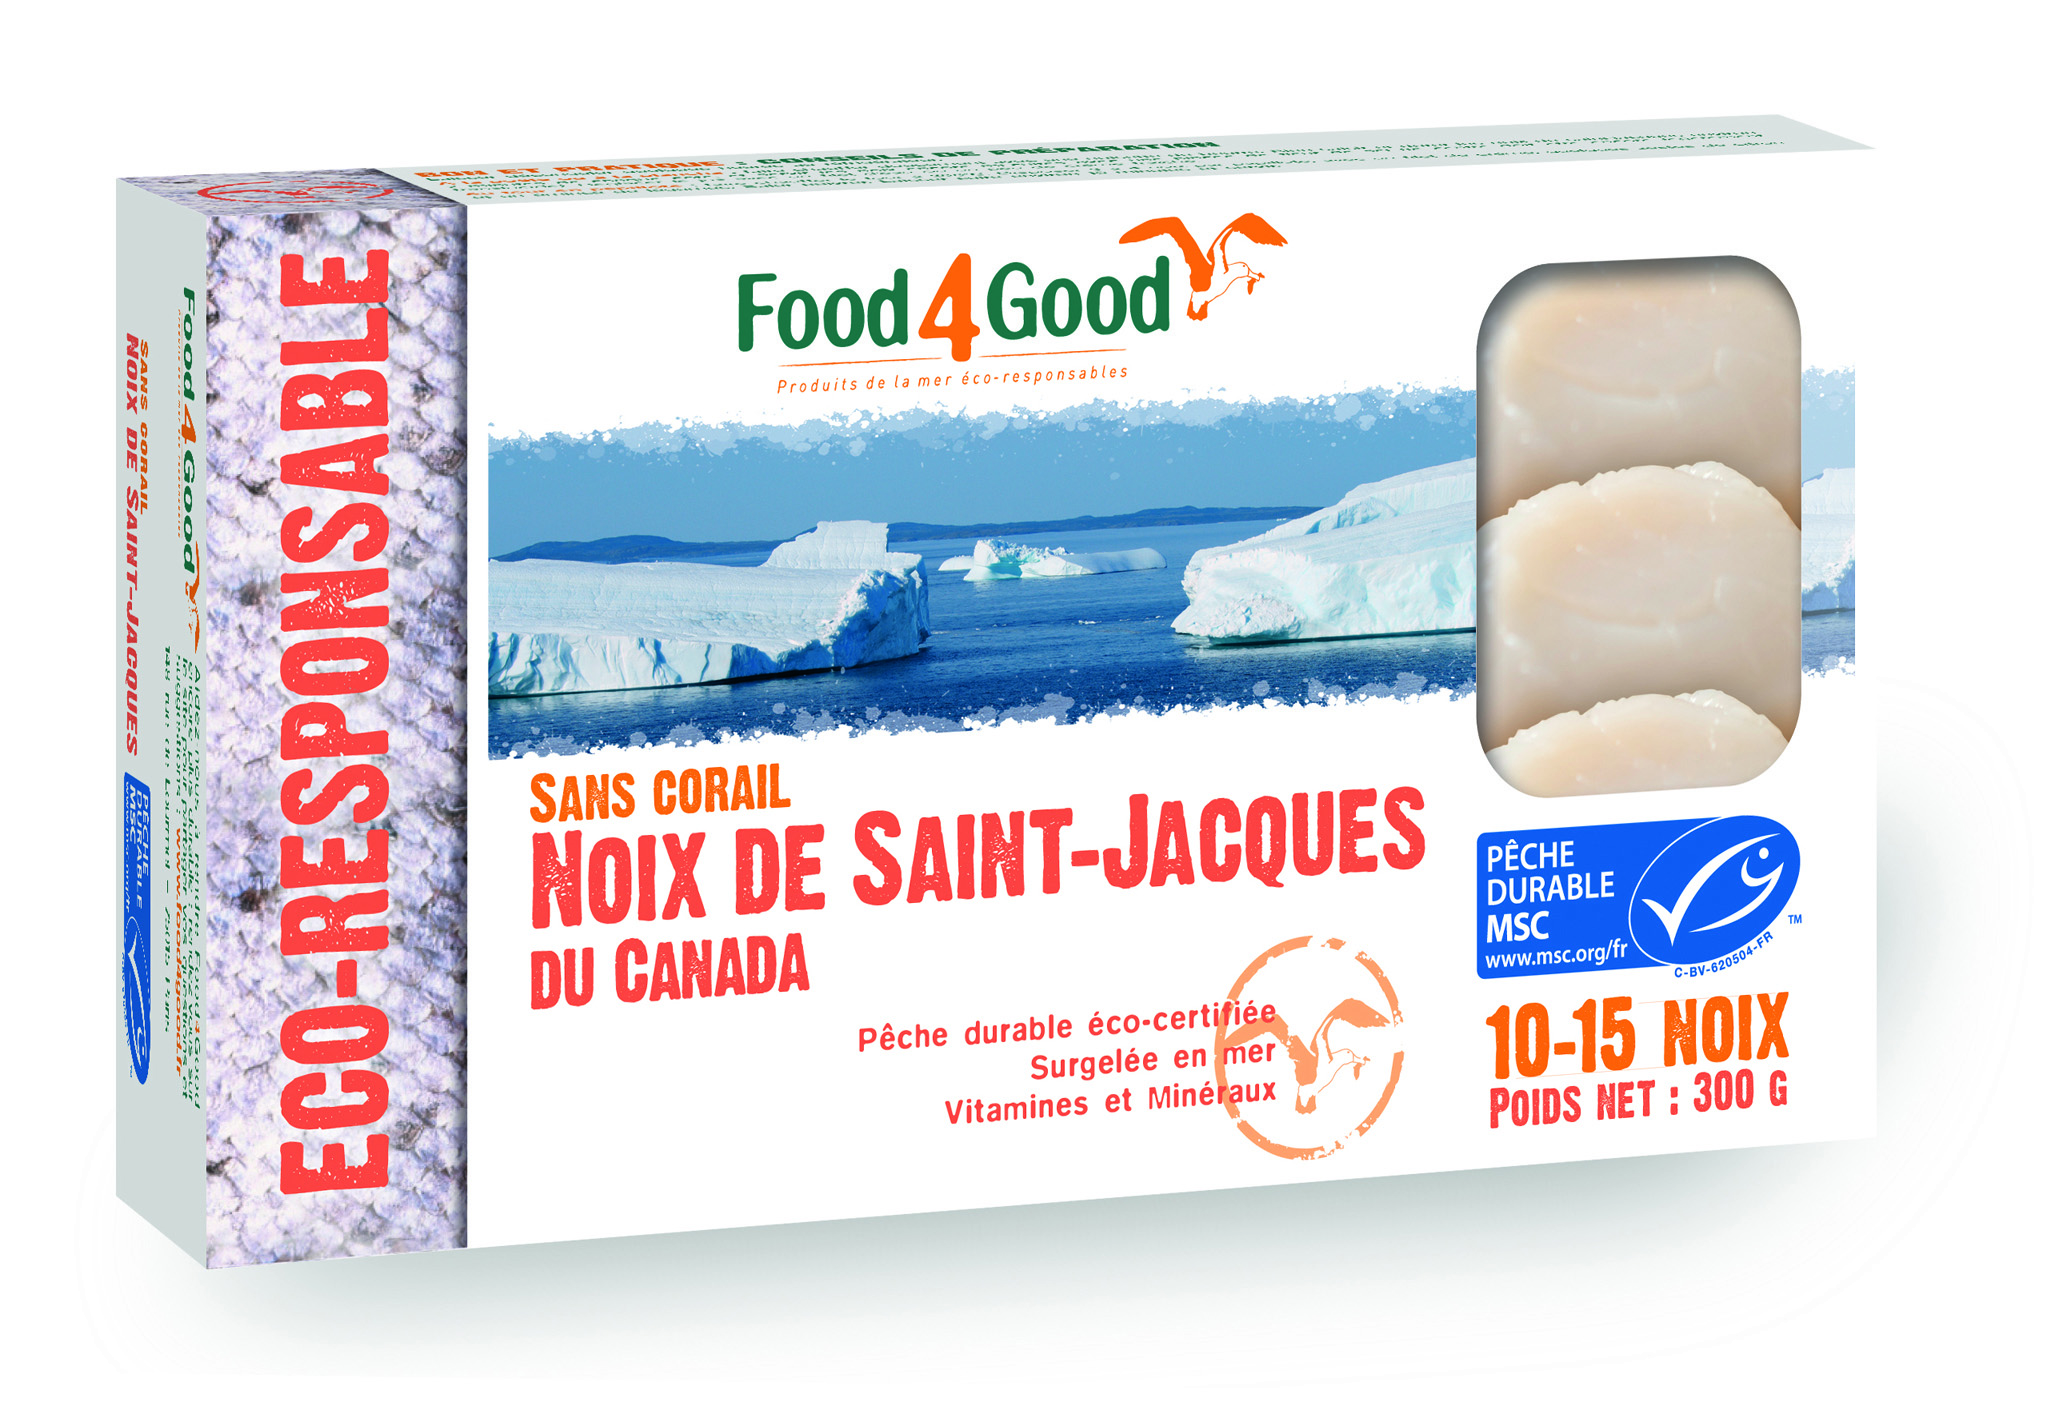 packaging-3D-st-jacques-du-canada-Food4Good